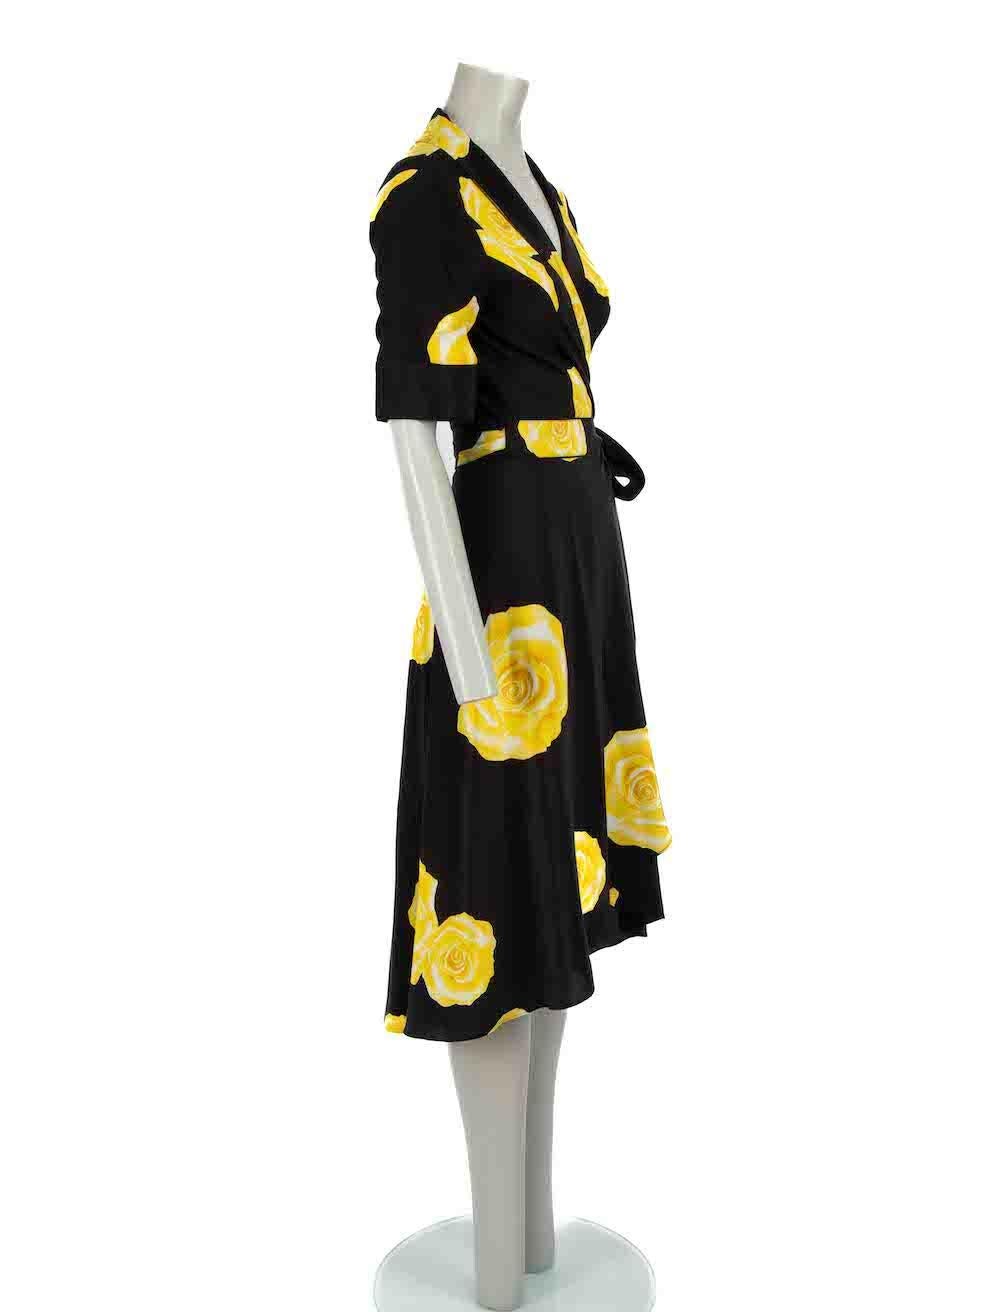 CONDITION is Very good. Hardly any visible wear to dress is evident on this used Ganni designer resale item.
 
 Details
 Fayette
 Black
 Silk
 Wrap dress
 Yellow rose print
 Midi
 V-neck
 Short sleeves
 
 
 Made in China
 
 Composition
 100% Silk
 
